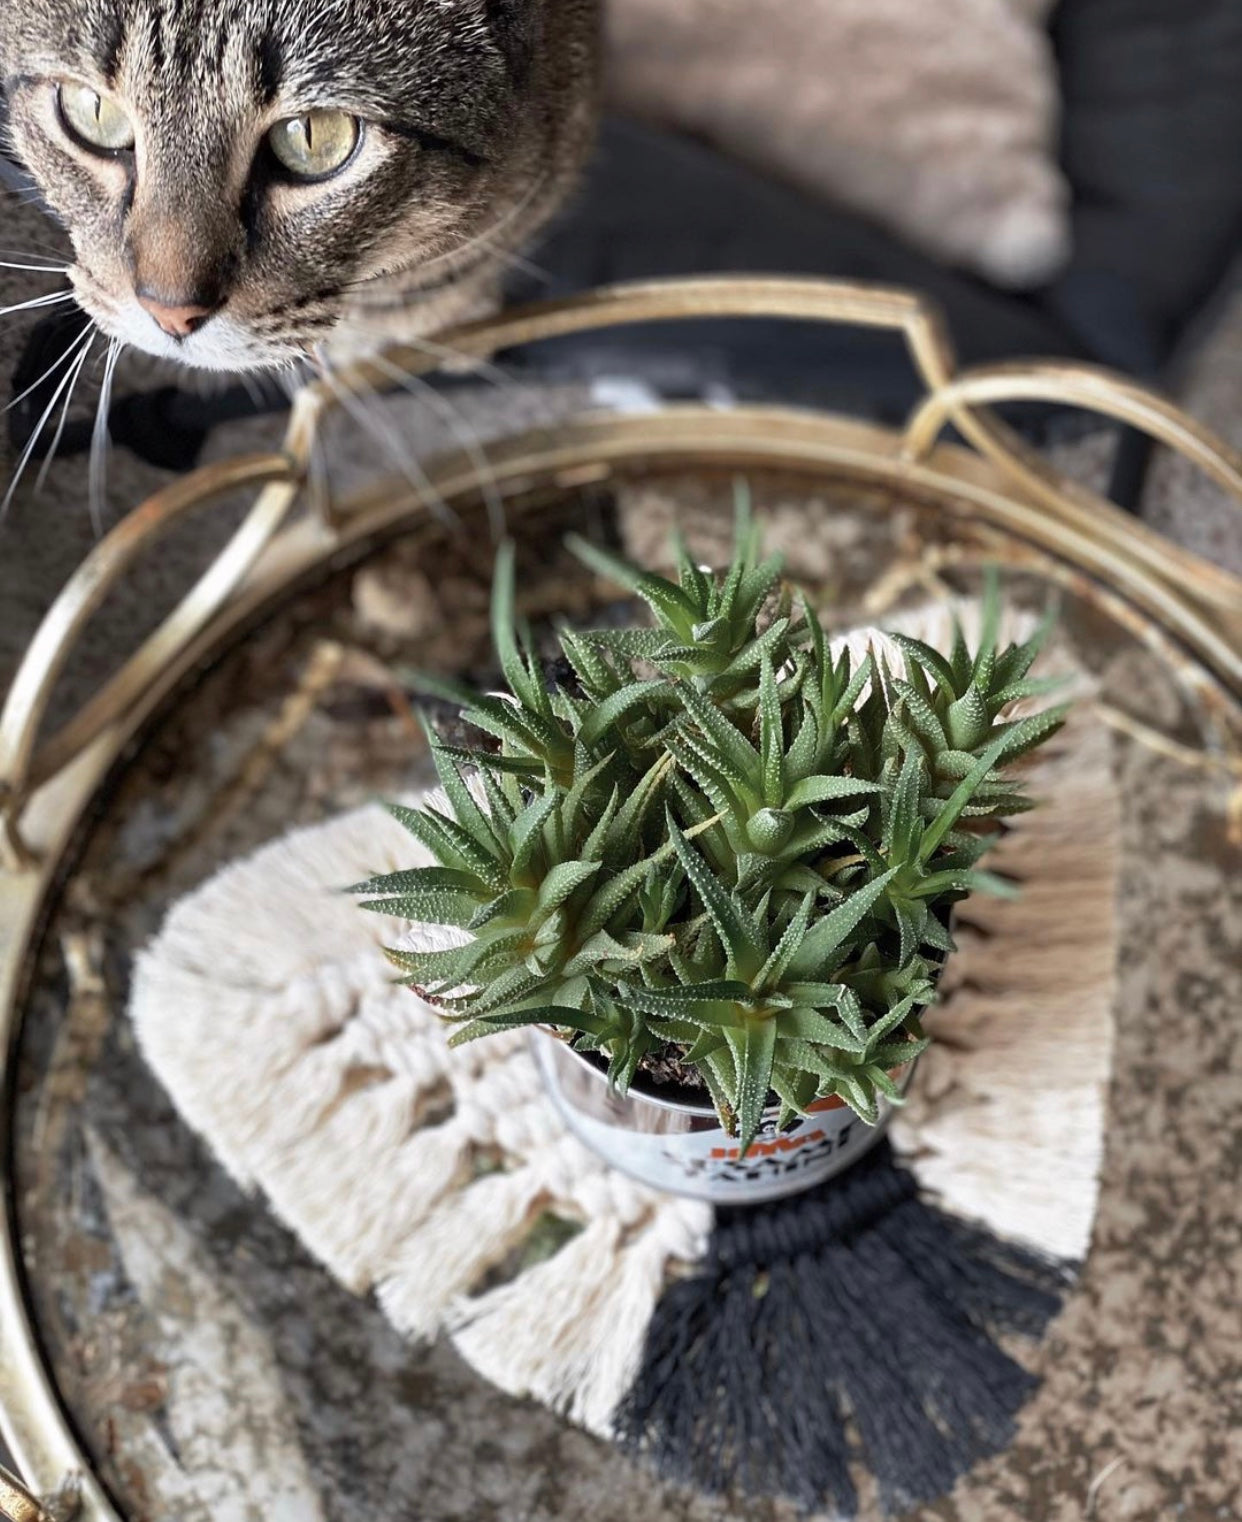 Bob the Cat with a macramé coaster and plant